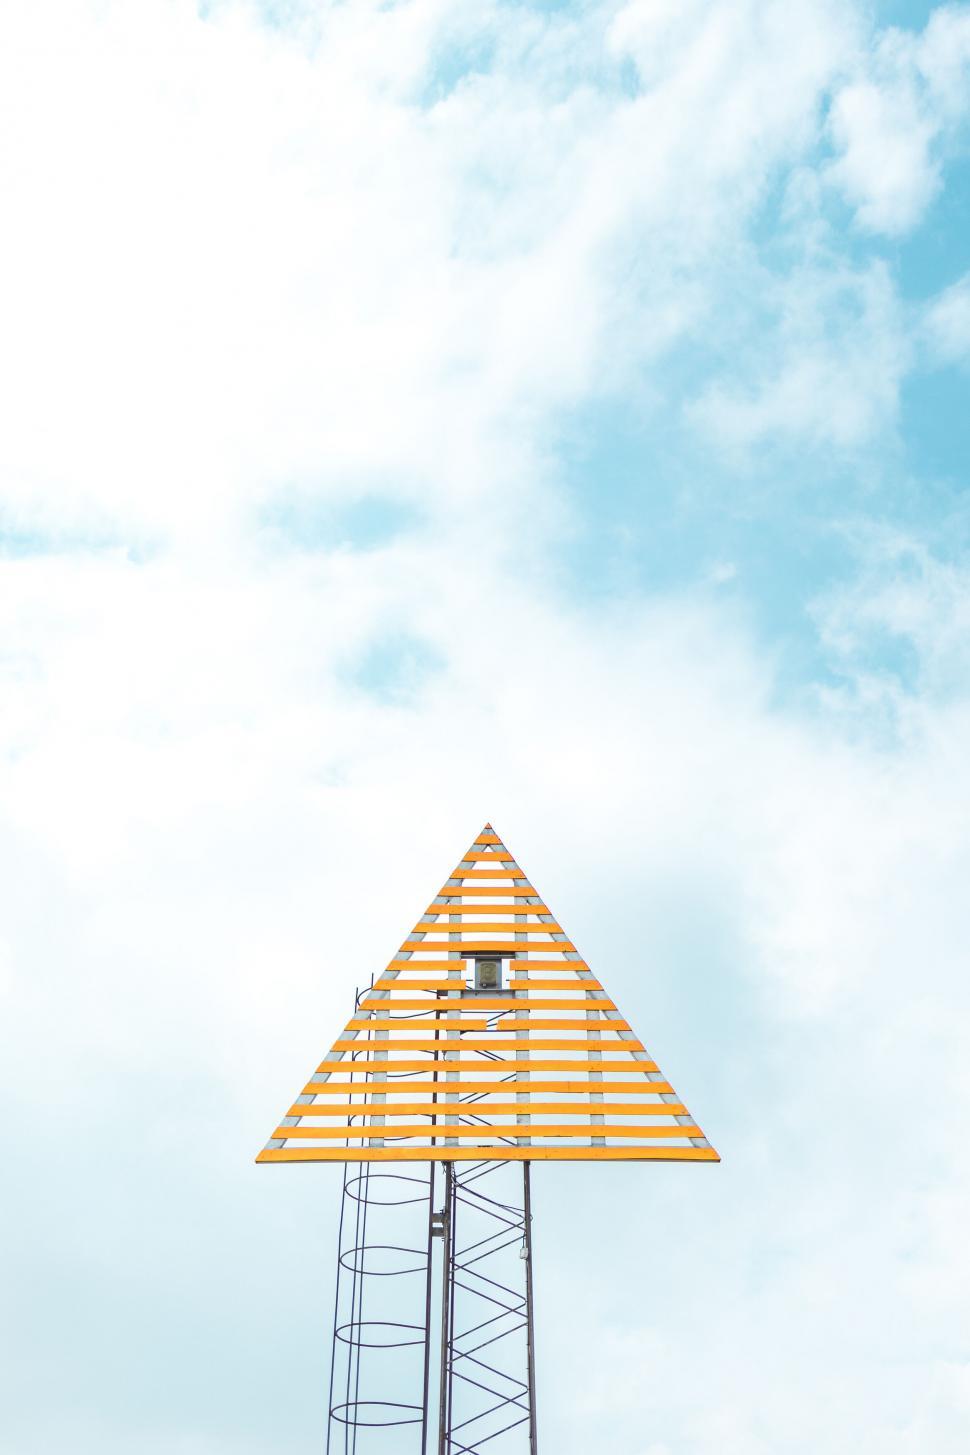 Free Image of Minimalist triangle structure against sky 